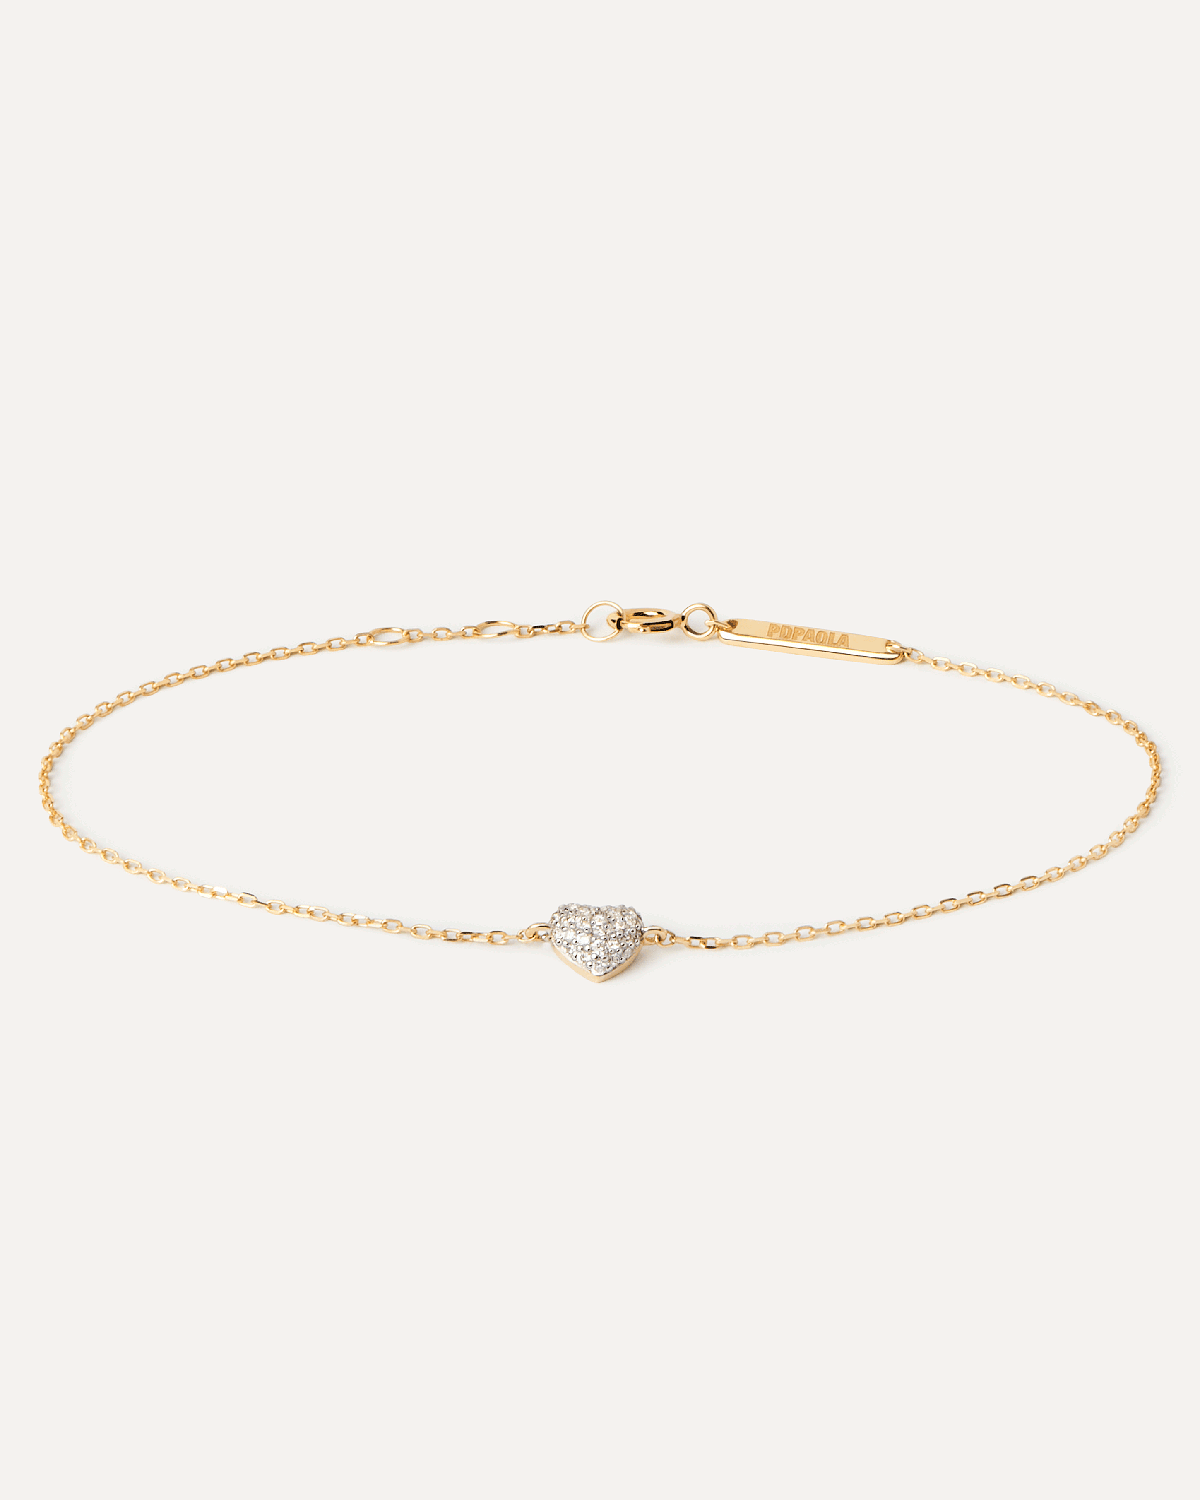 Diamonds and gold Heart bracelet. Solid yellow gold bracelet featuring a heart shape pavé lab-grown diamond of 0.11 carats. Get the latest arrival from PDPAOLA. Place your order safely and get this Best Seller.